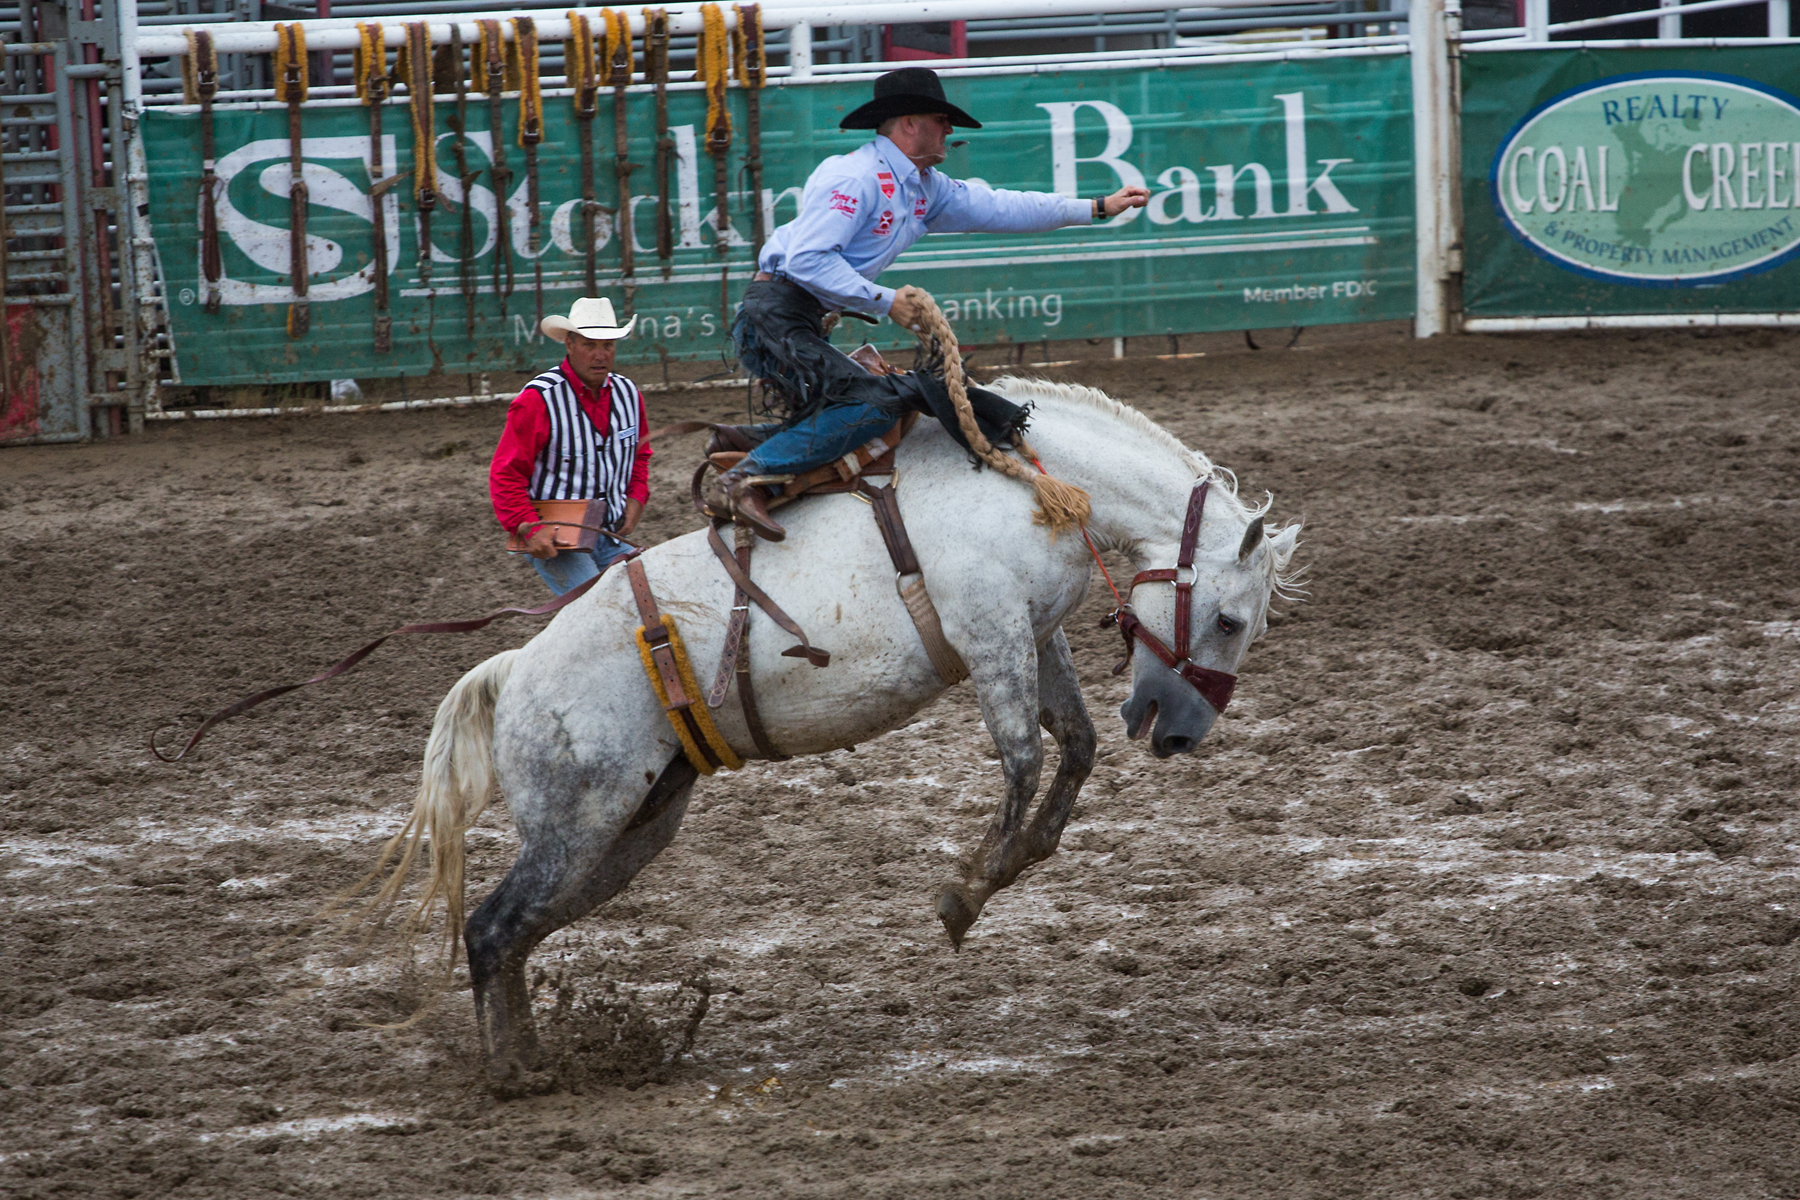 Saddle bronc at Home of Champions Rodeo, Red Lodge, MT.  Click for next photo.